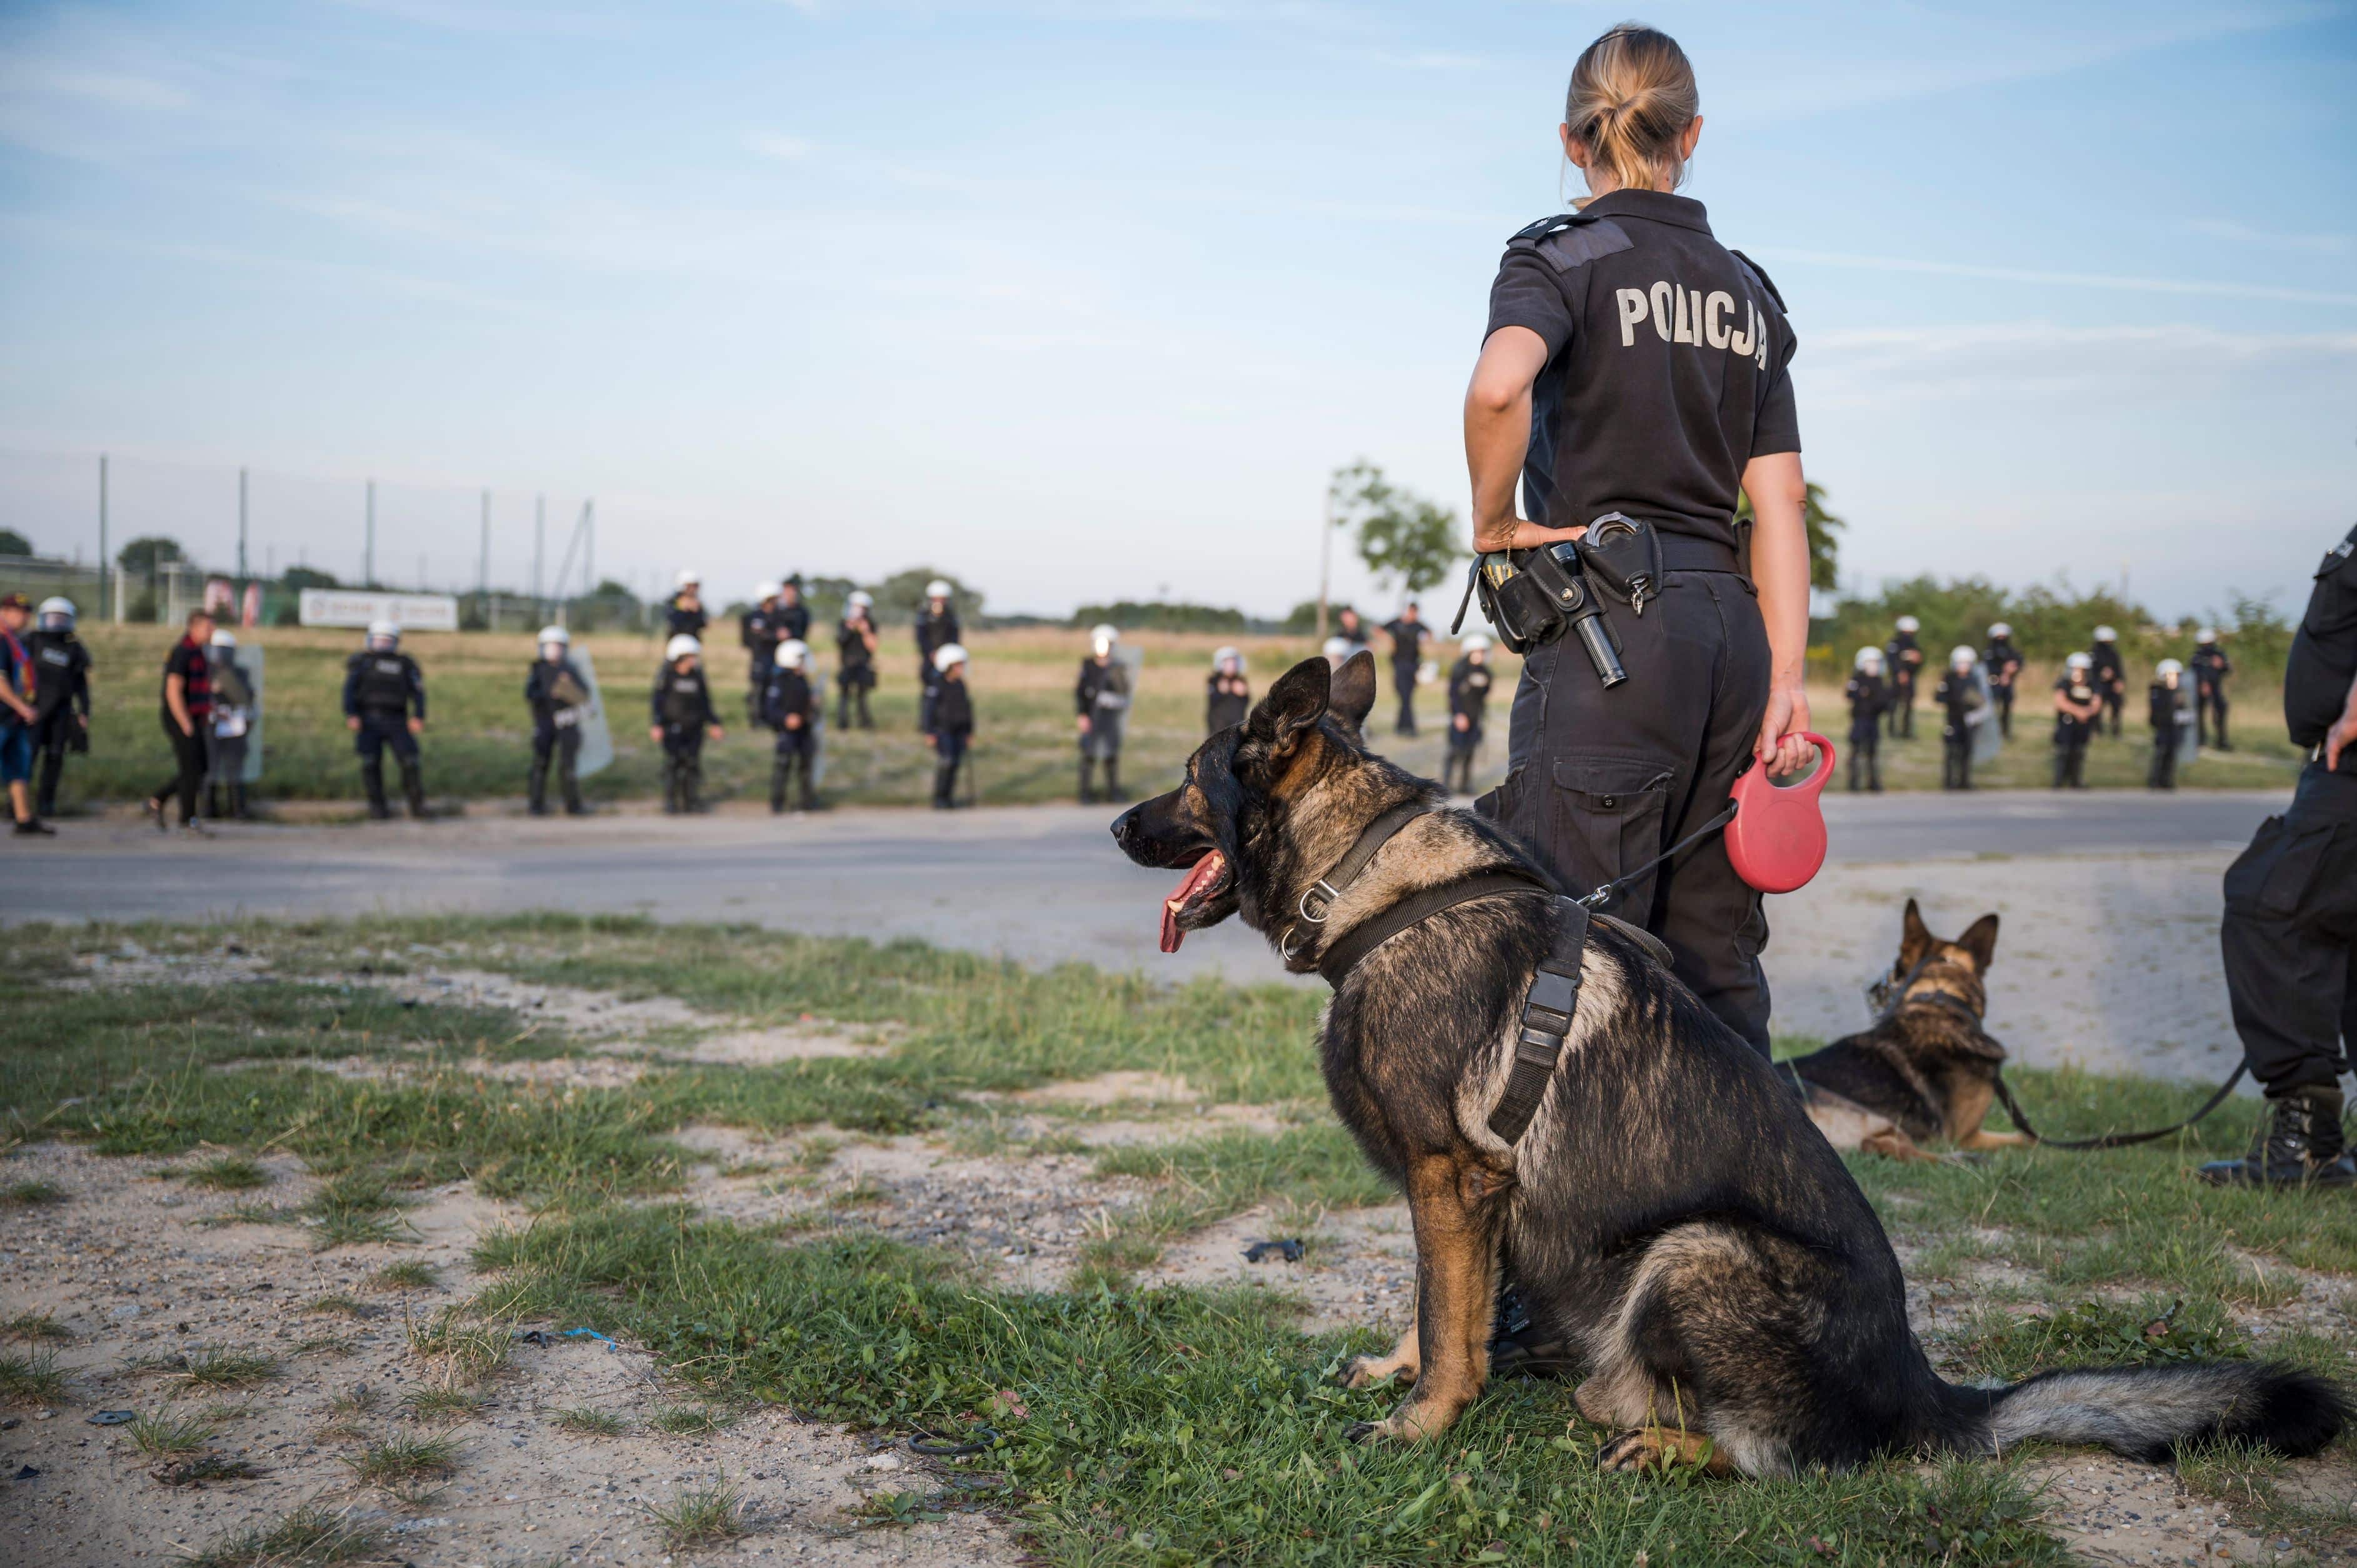 Police dog held by a policewoman (caption in Polish "Police") with many policemen in the background